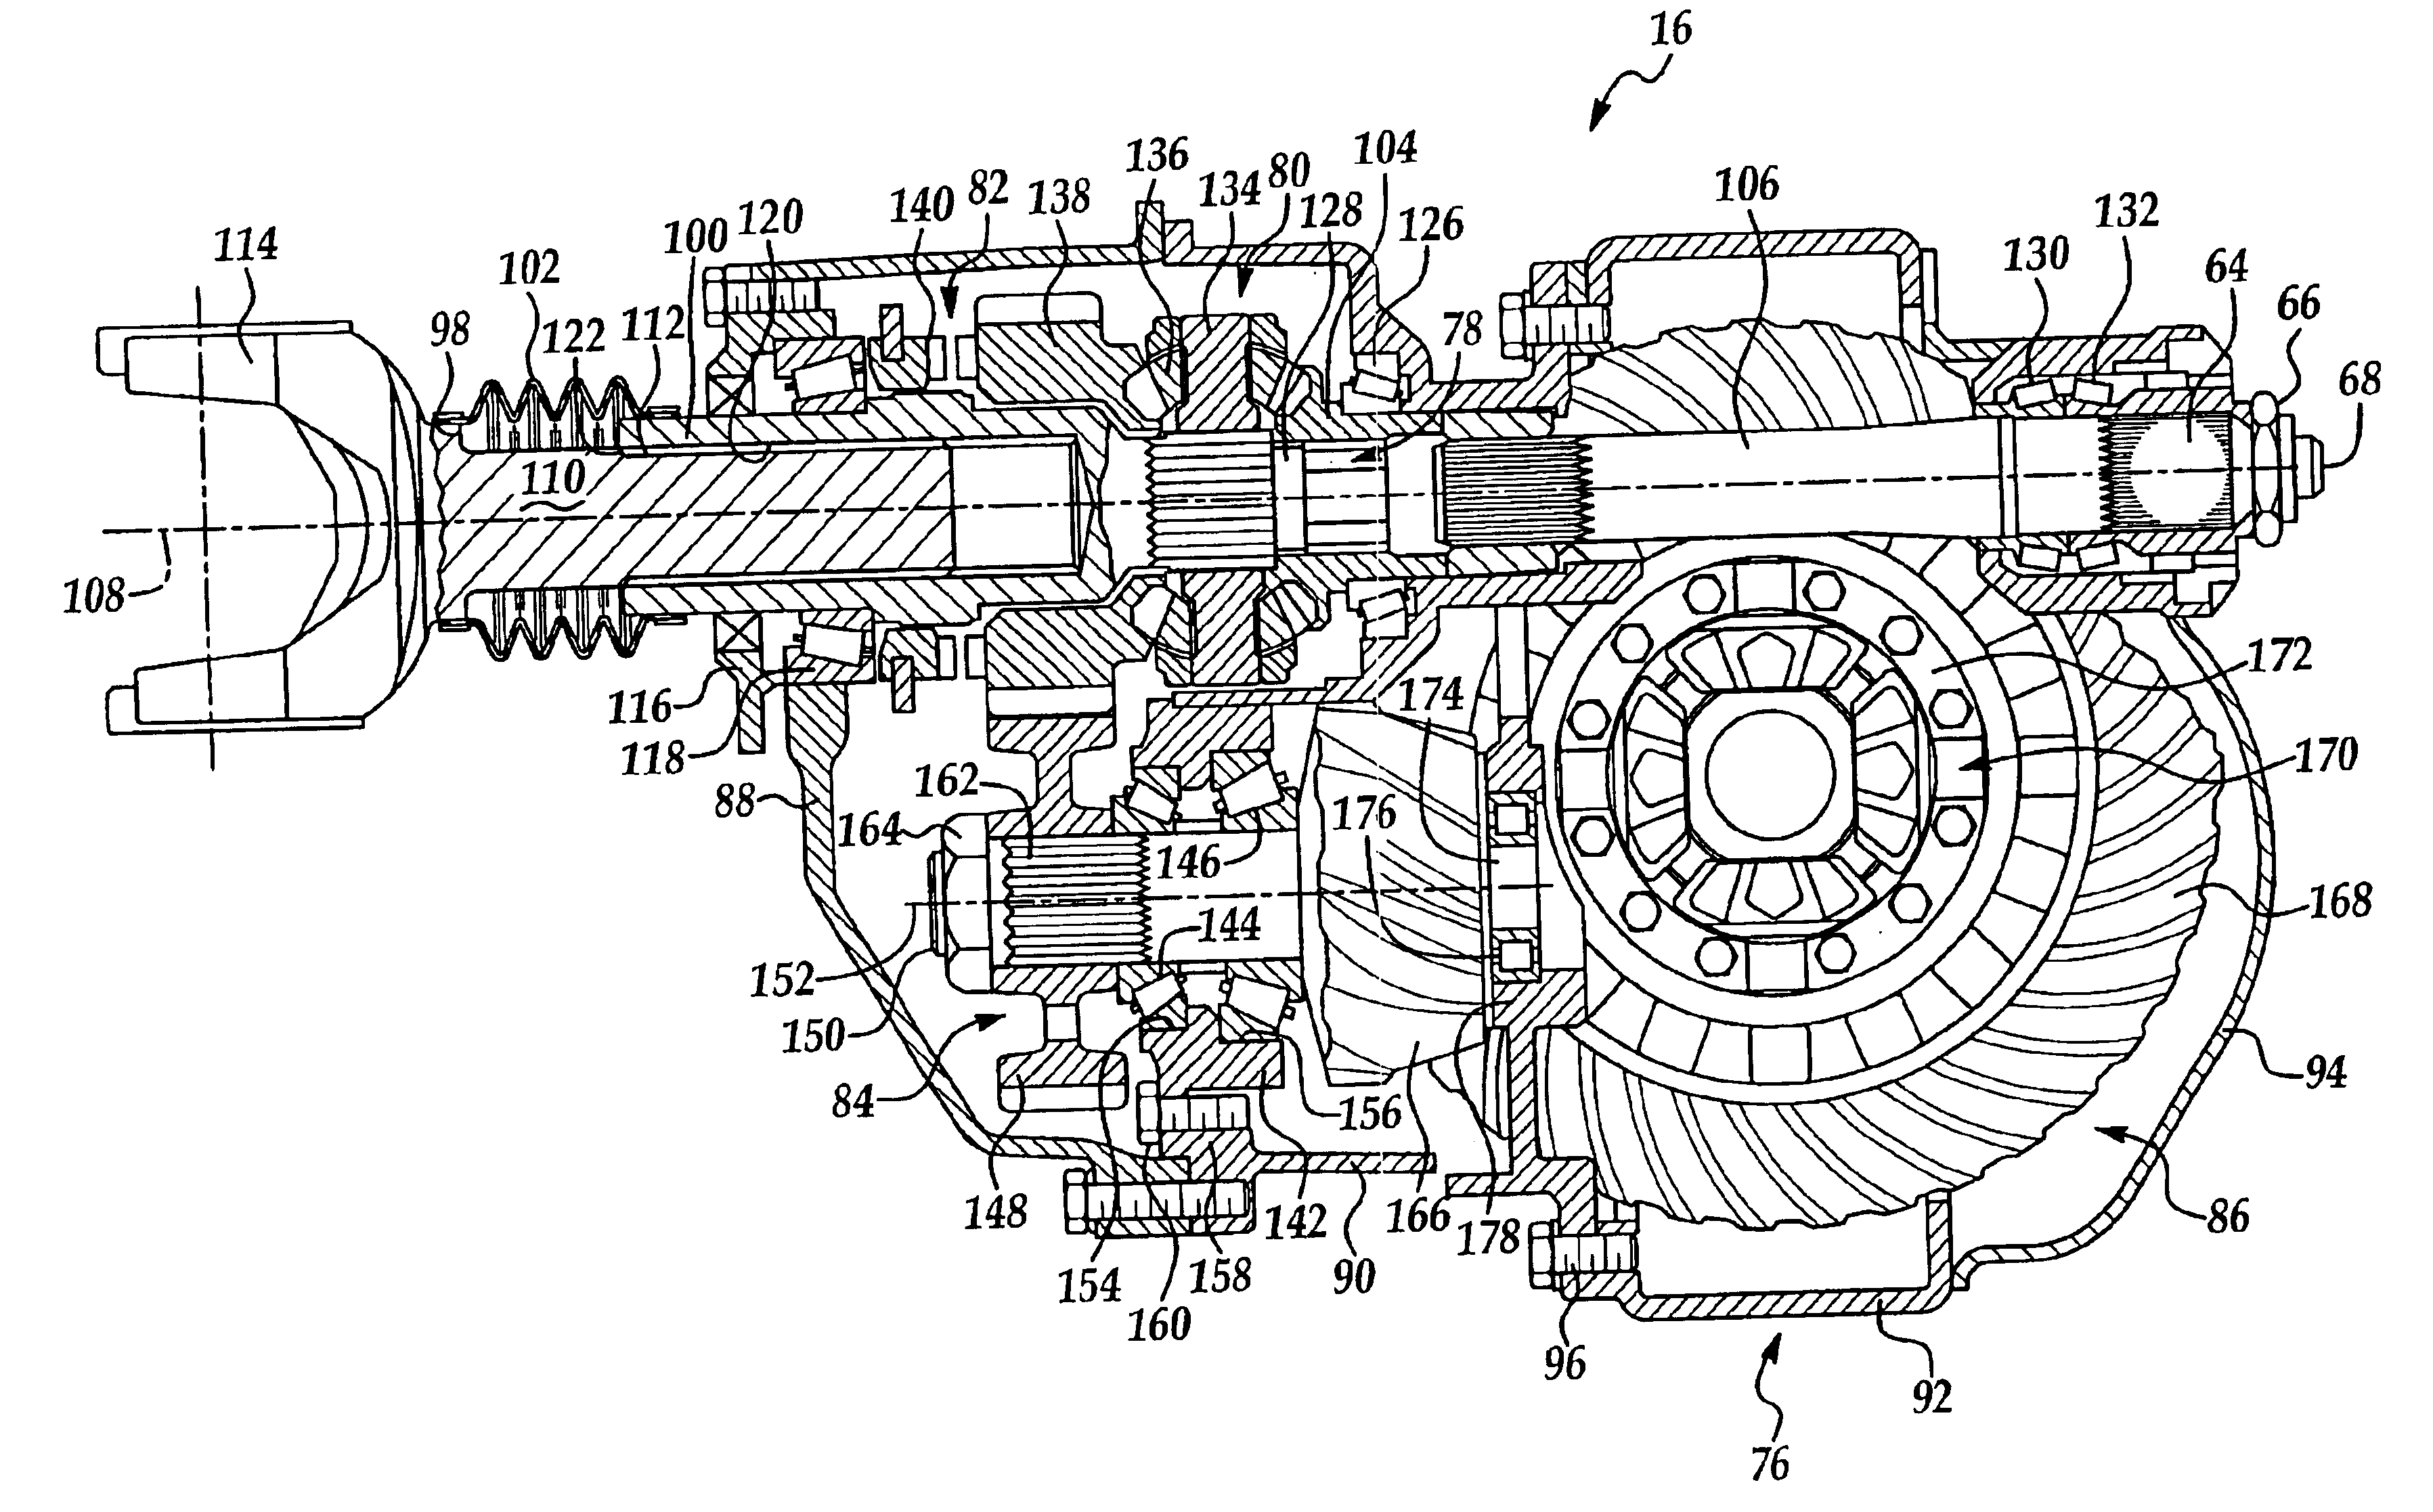 Tandem axle power divider assembly with inboard slip driveshaft connection